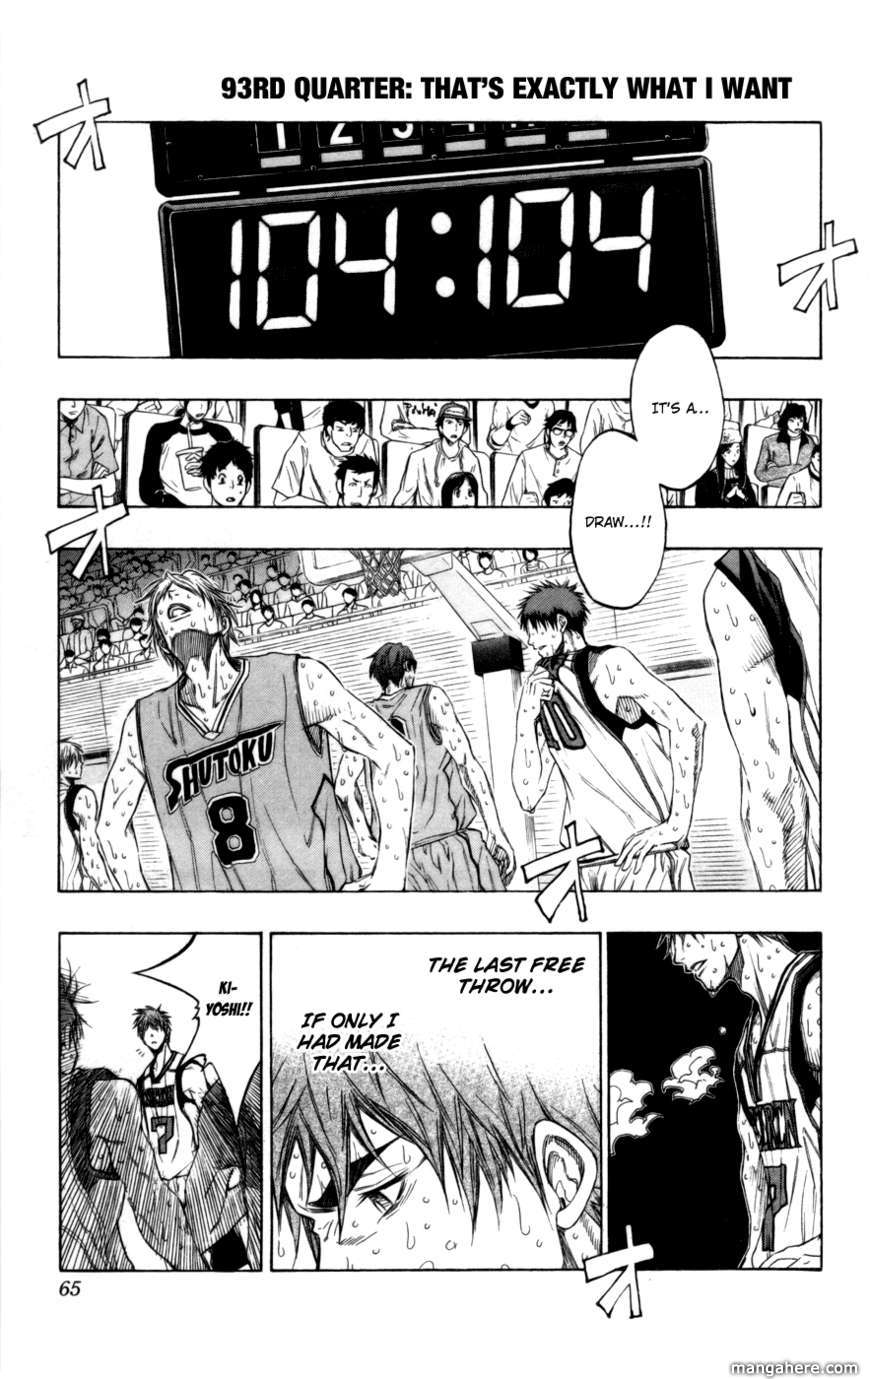 Kuroko No Basket Vol.11 Chapter 093 : That's Exactly What I Want - Picture 1